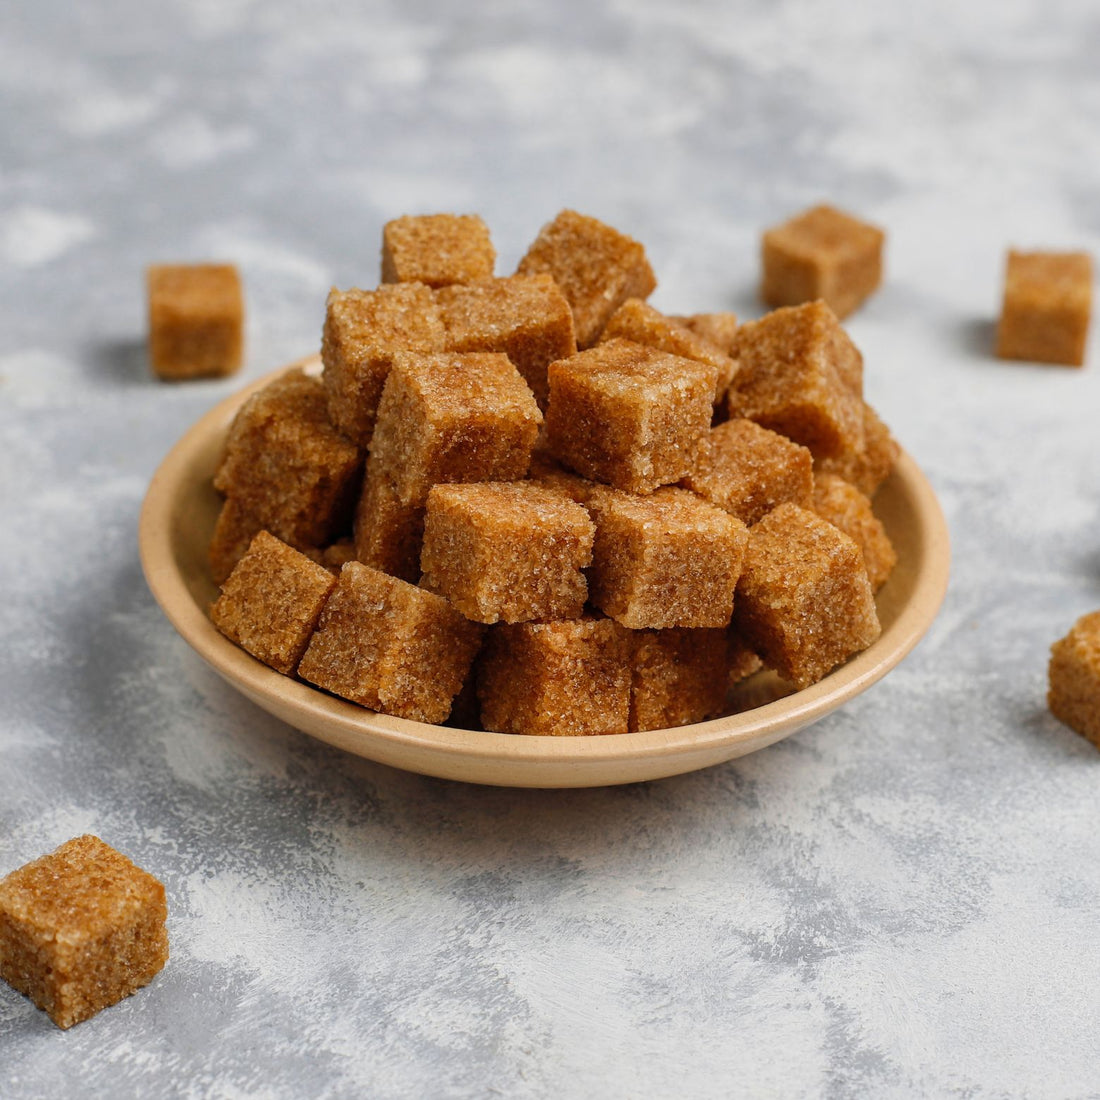 Sugar-Free vs. Sugar Alternatives: What's the Difference and Which One is Better for You?